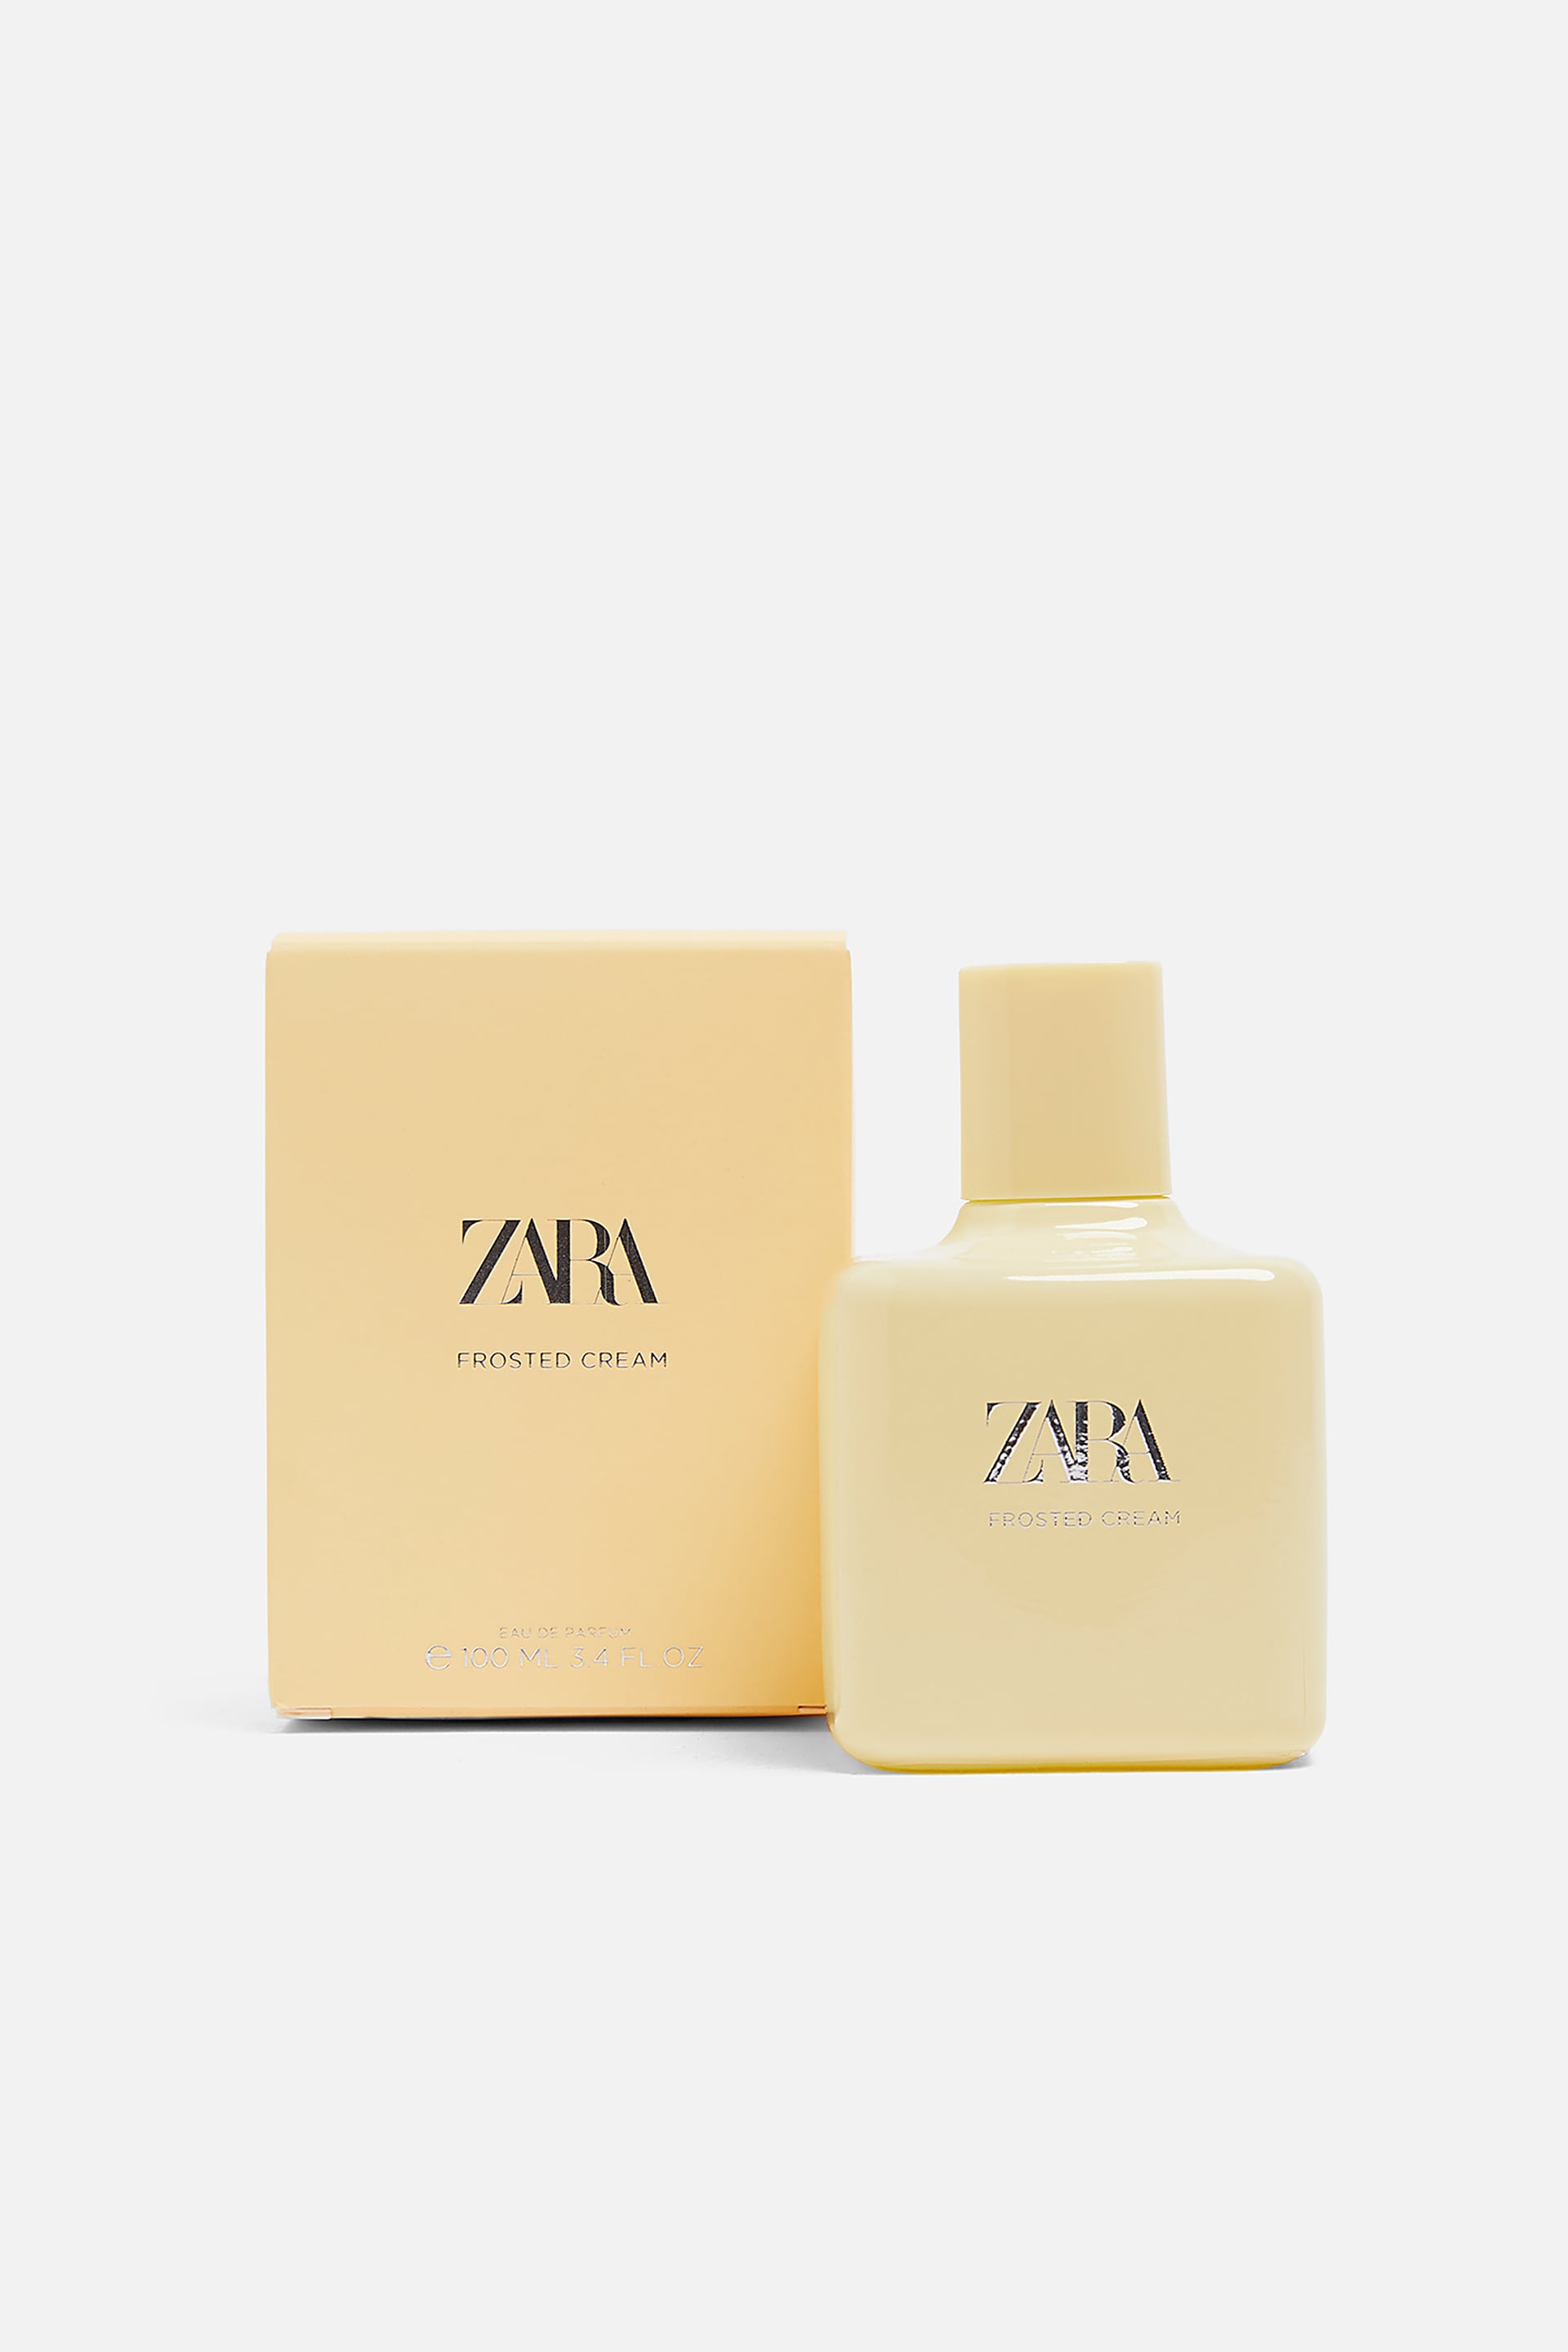 Frosted Cream 2019 Zara perfume - a new 